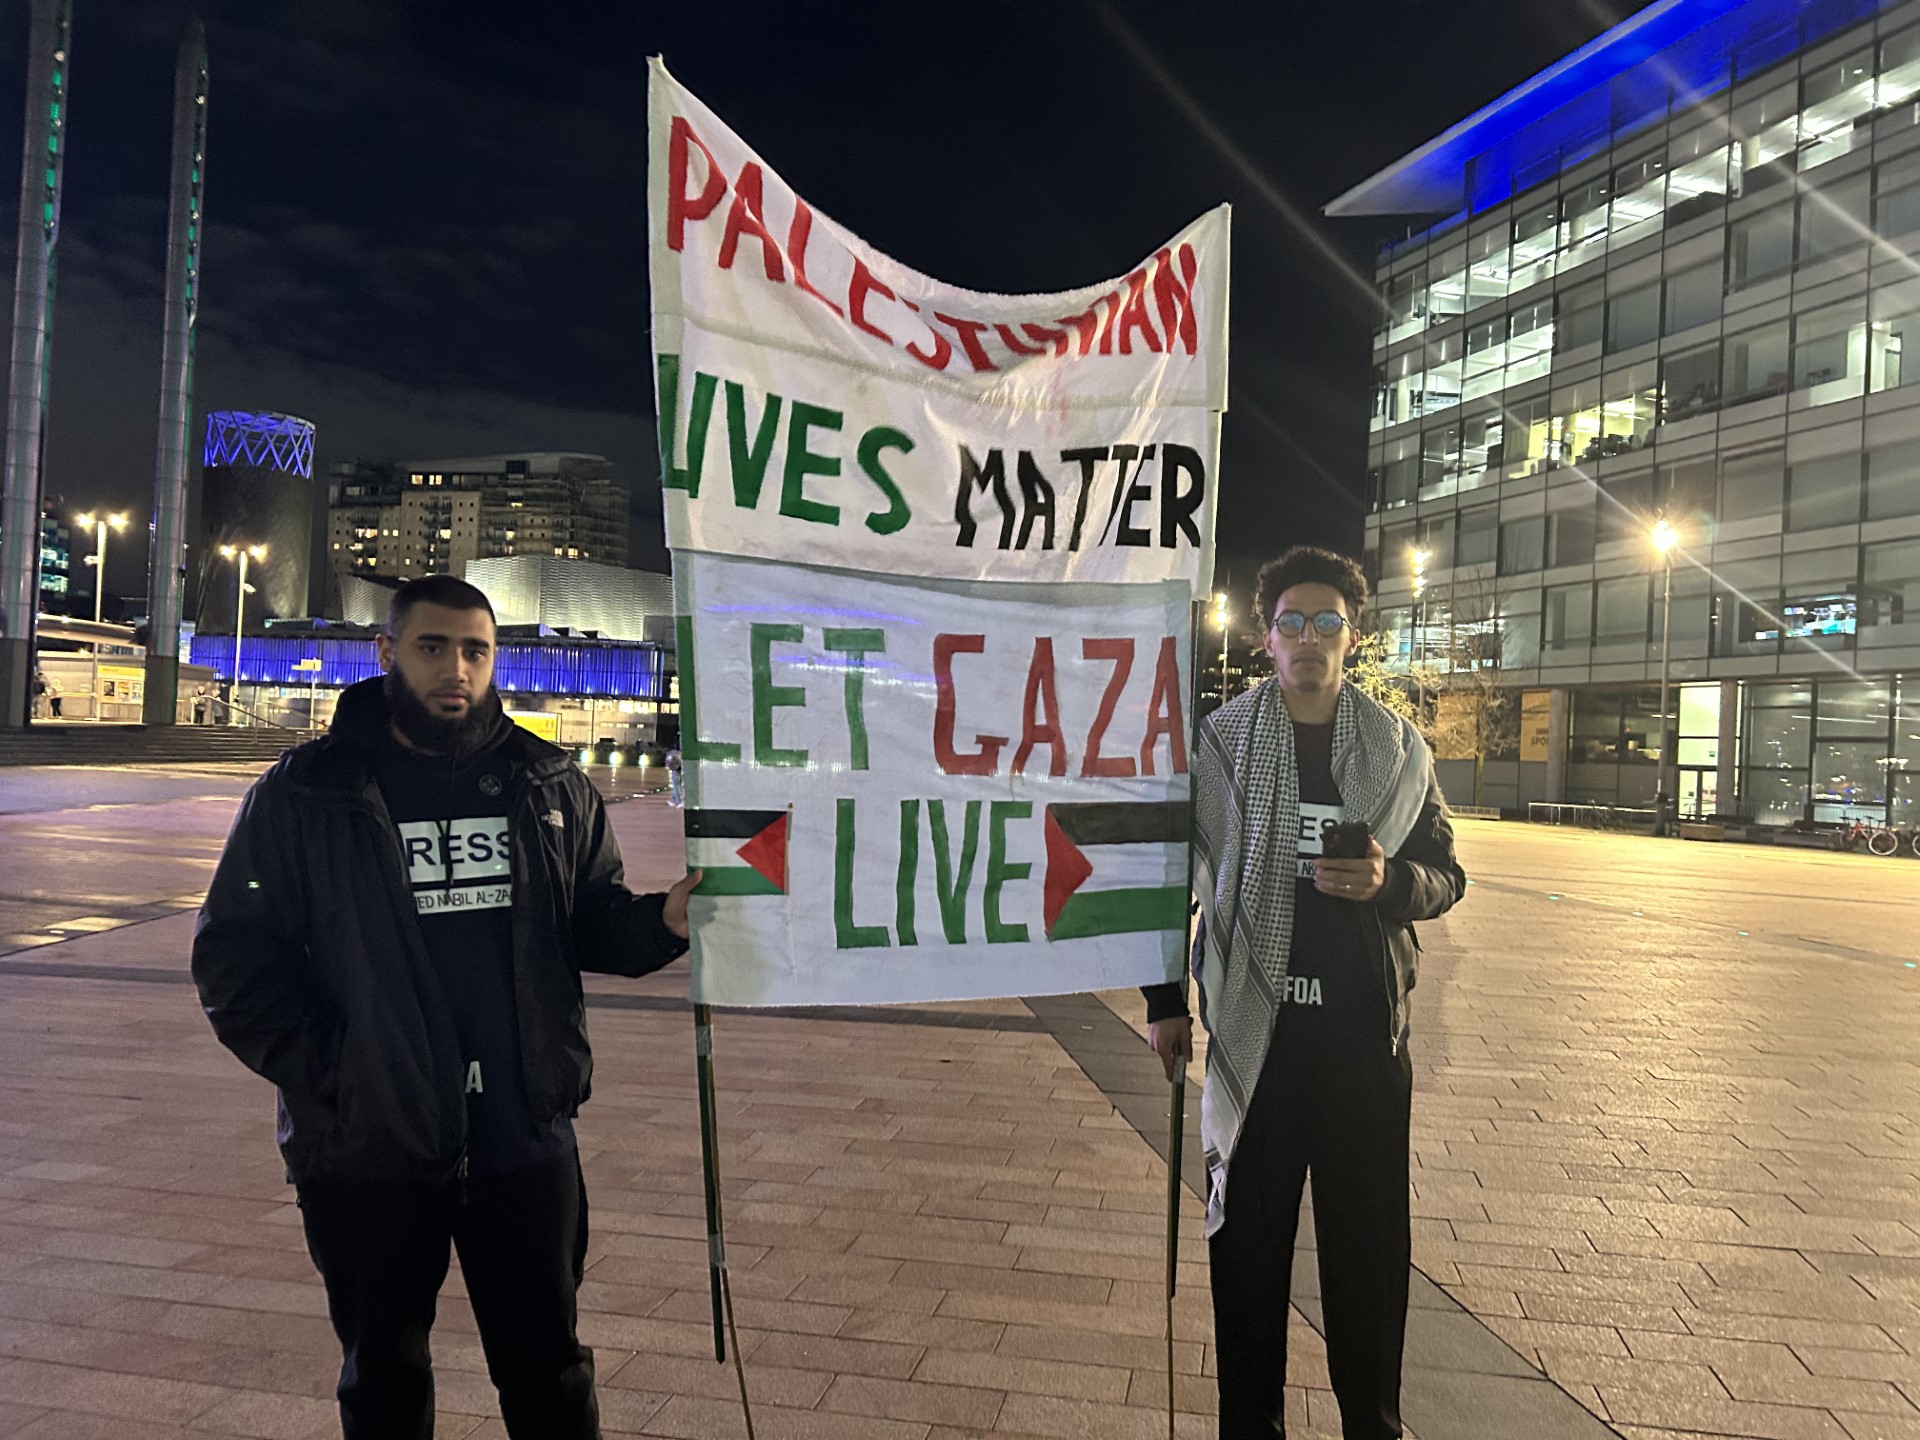 "There is a need in Salford for solidarity with Palestine" - Protestors hold vigil in MediaCity in honour of Palestinian journalists killed